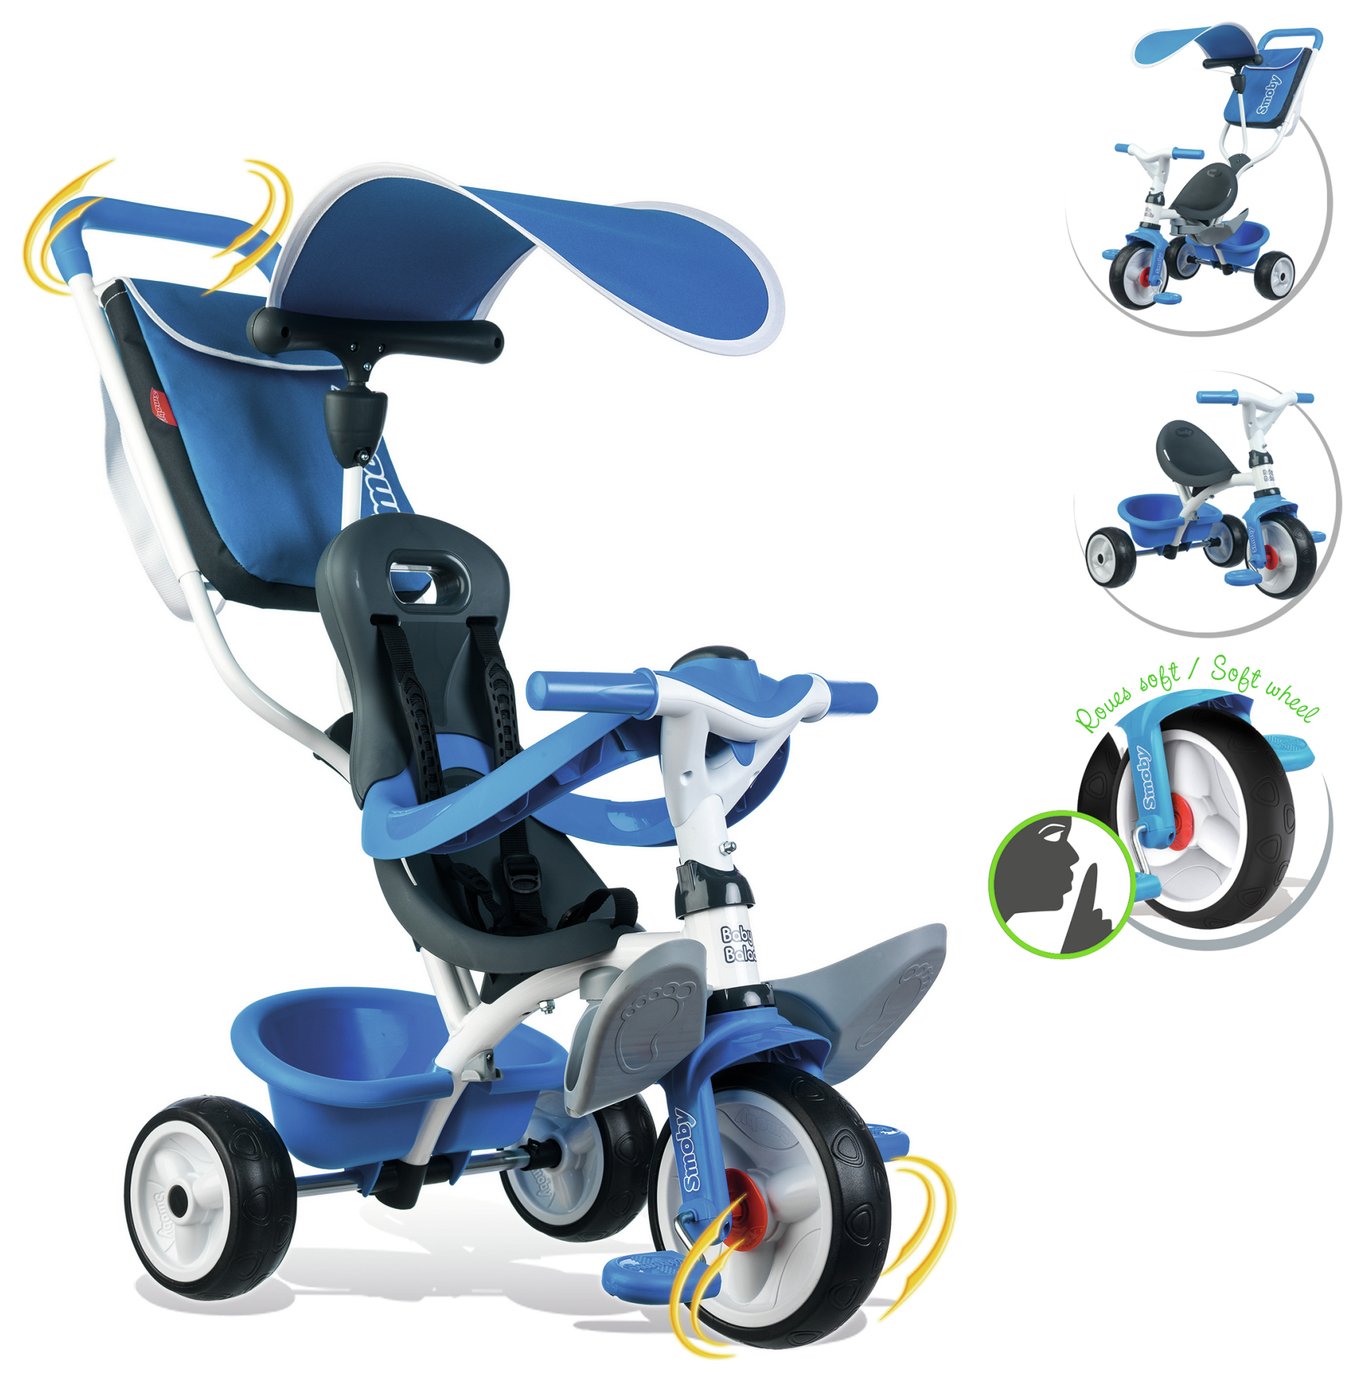 Smoby 3 in 1 Trike Review